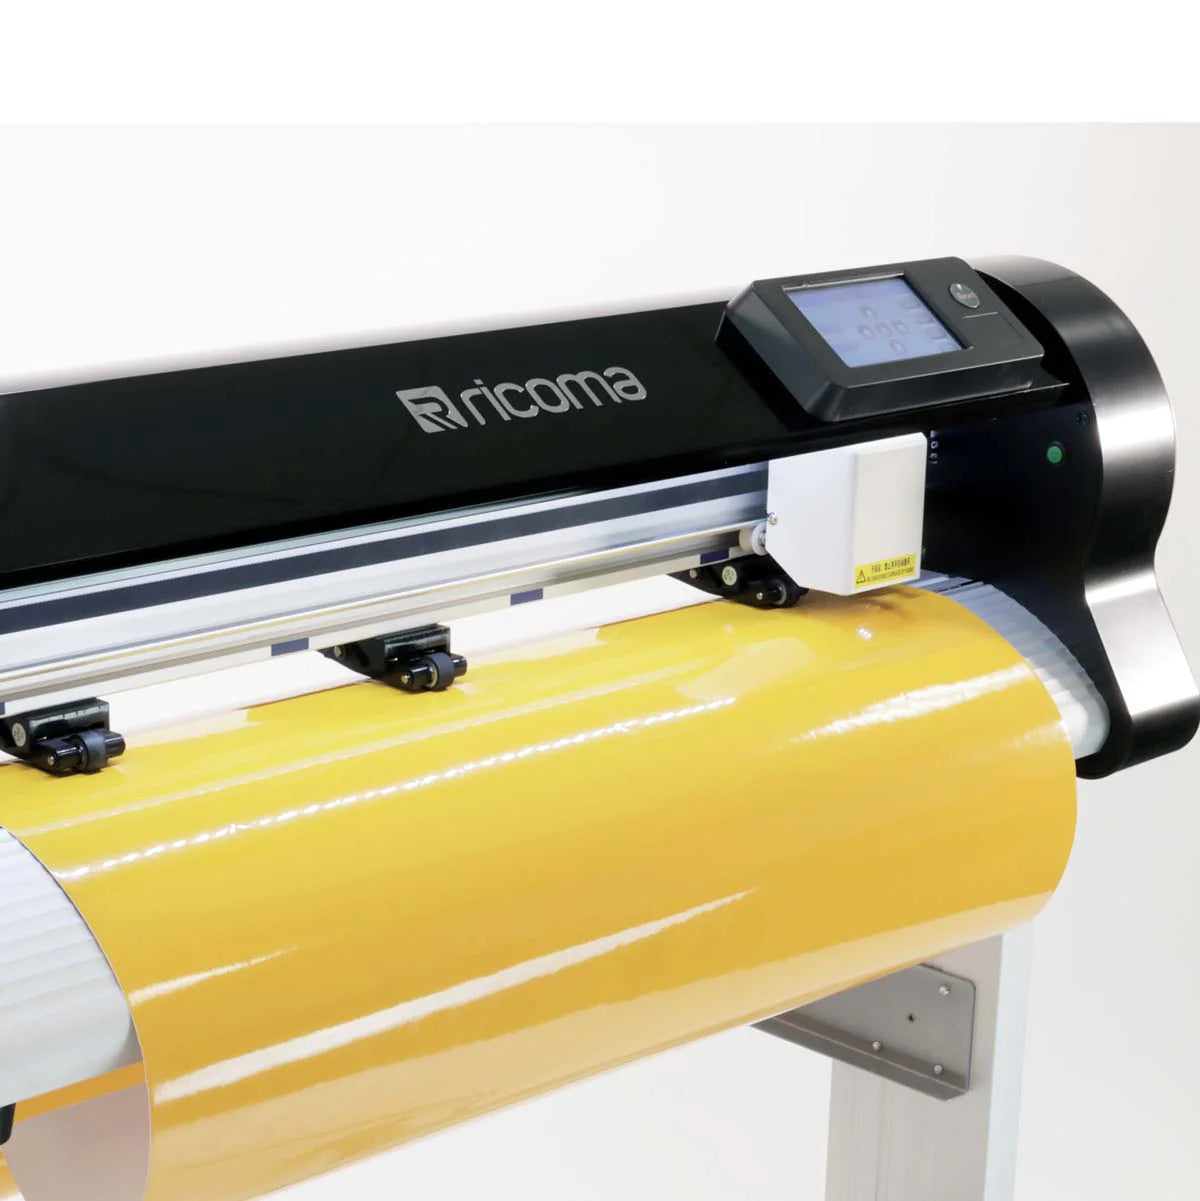 Slide-out platen on Ricoma’s flat heat presses is a feature designed with safety and comfort in mind